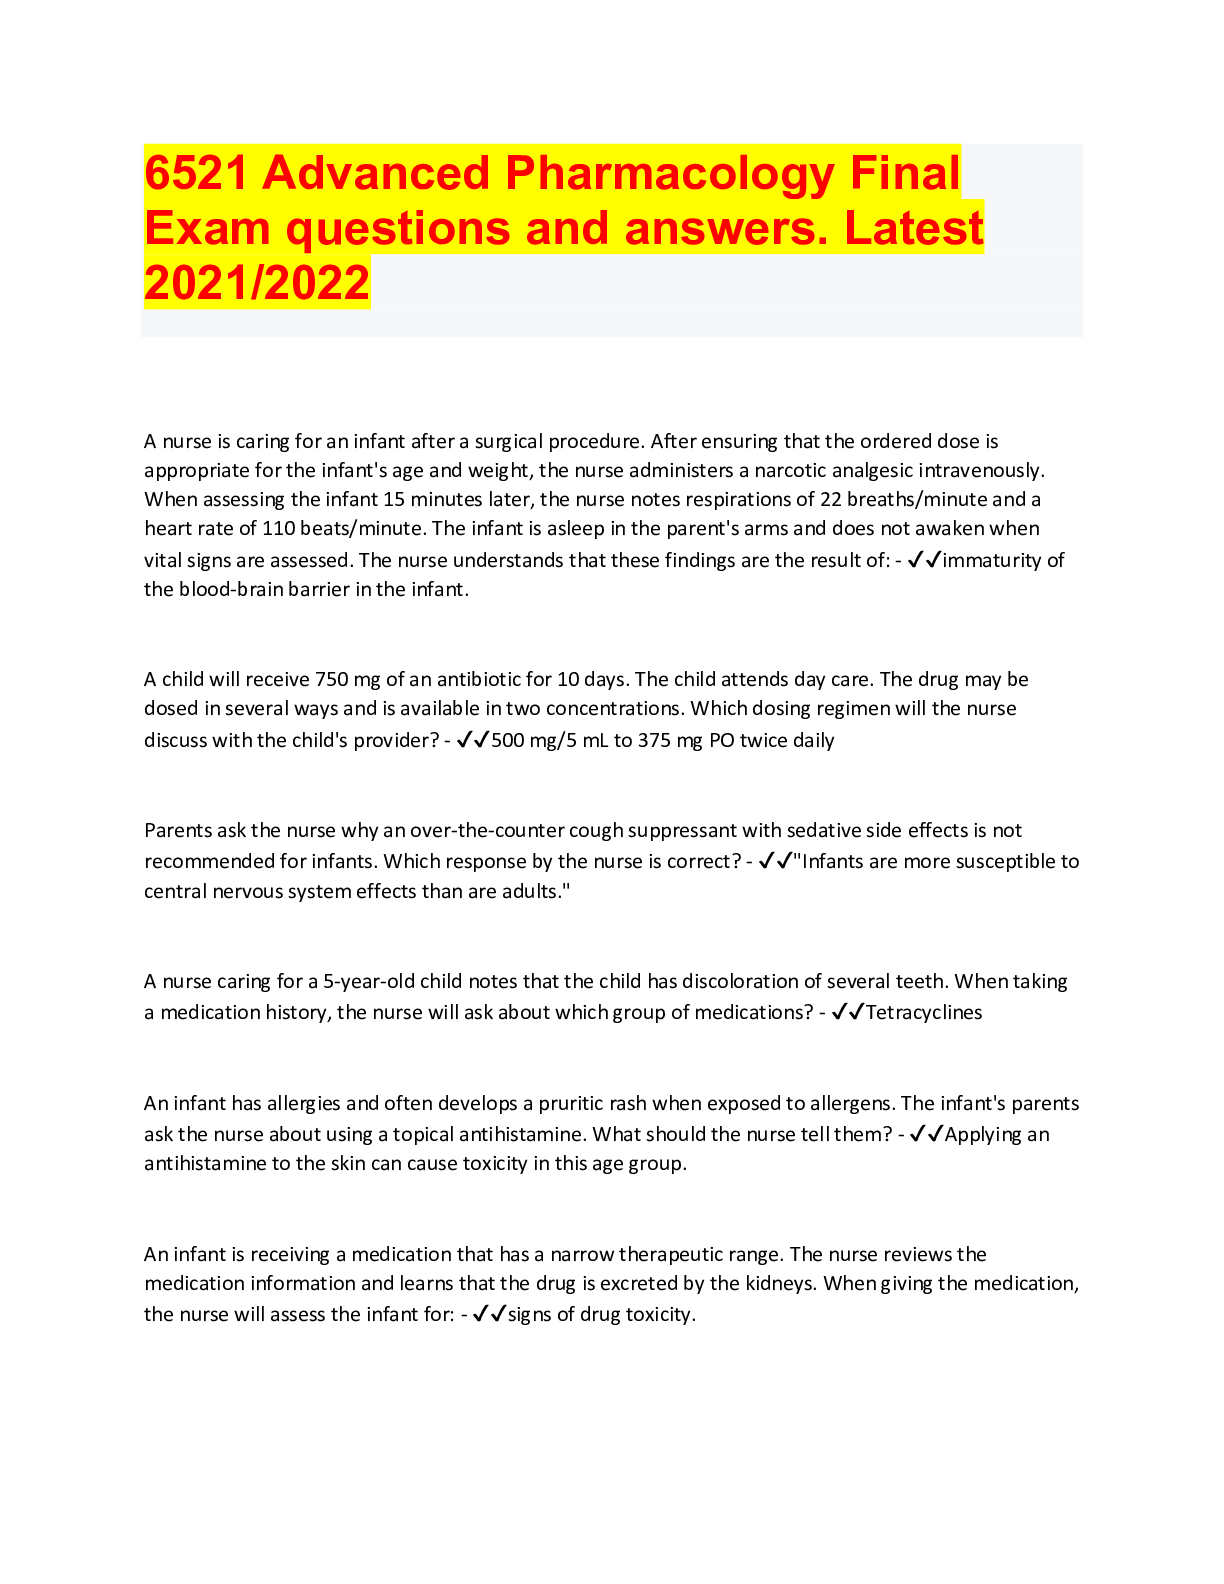 pharmacology case study questions and answers